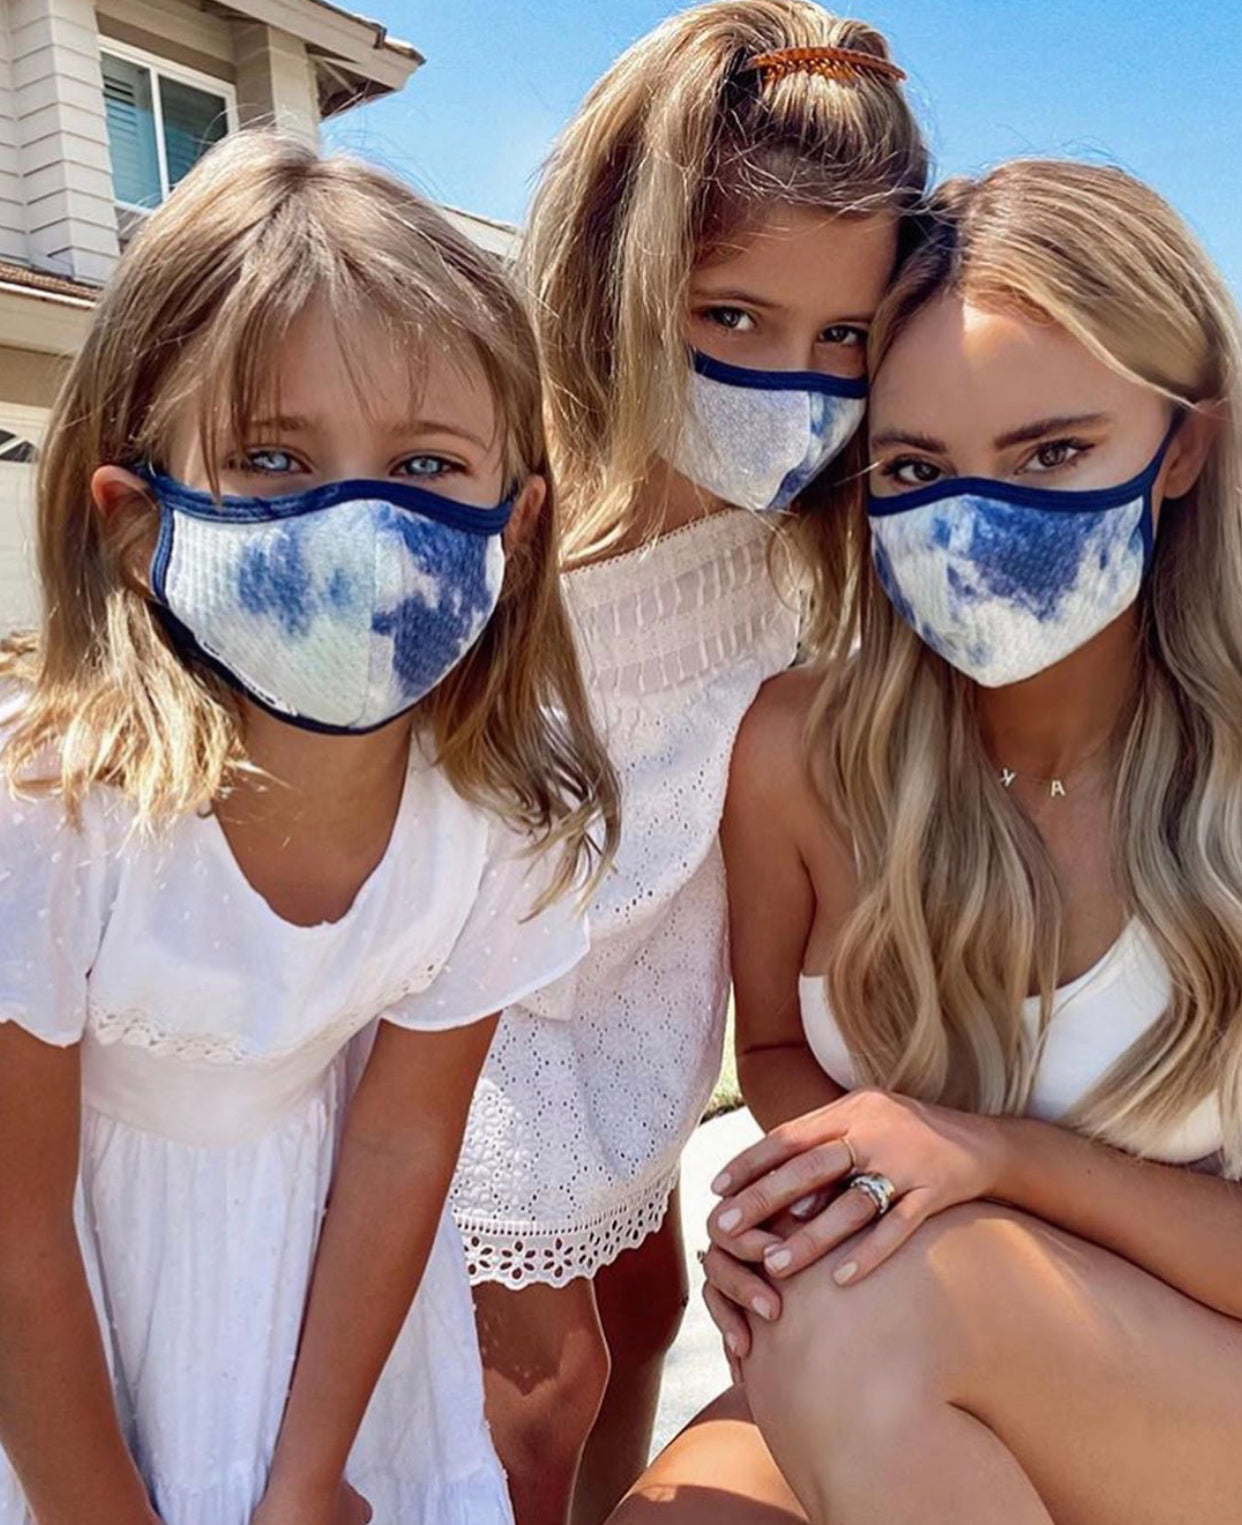 3 Atlantic face masks with adjustable straps worn by women and children